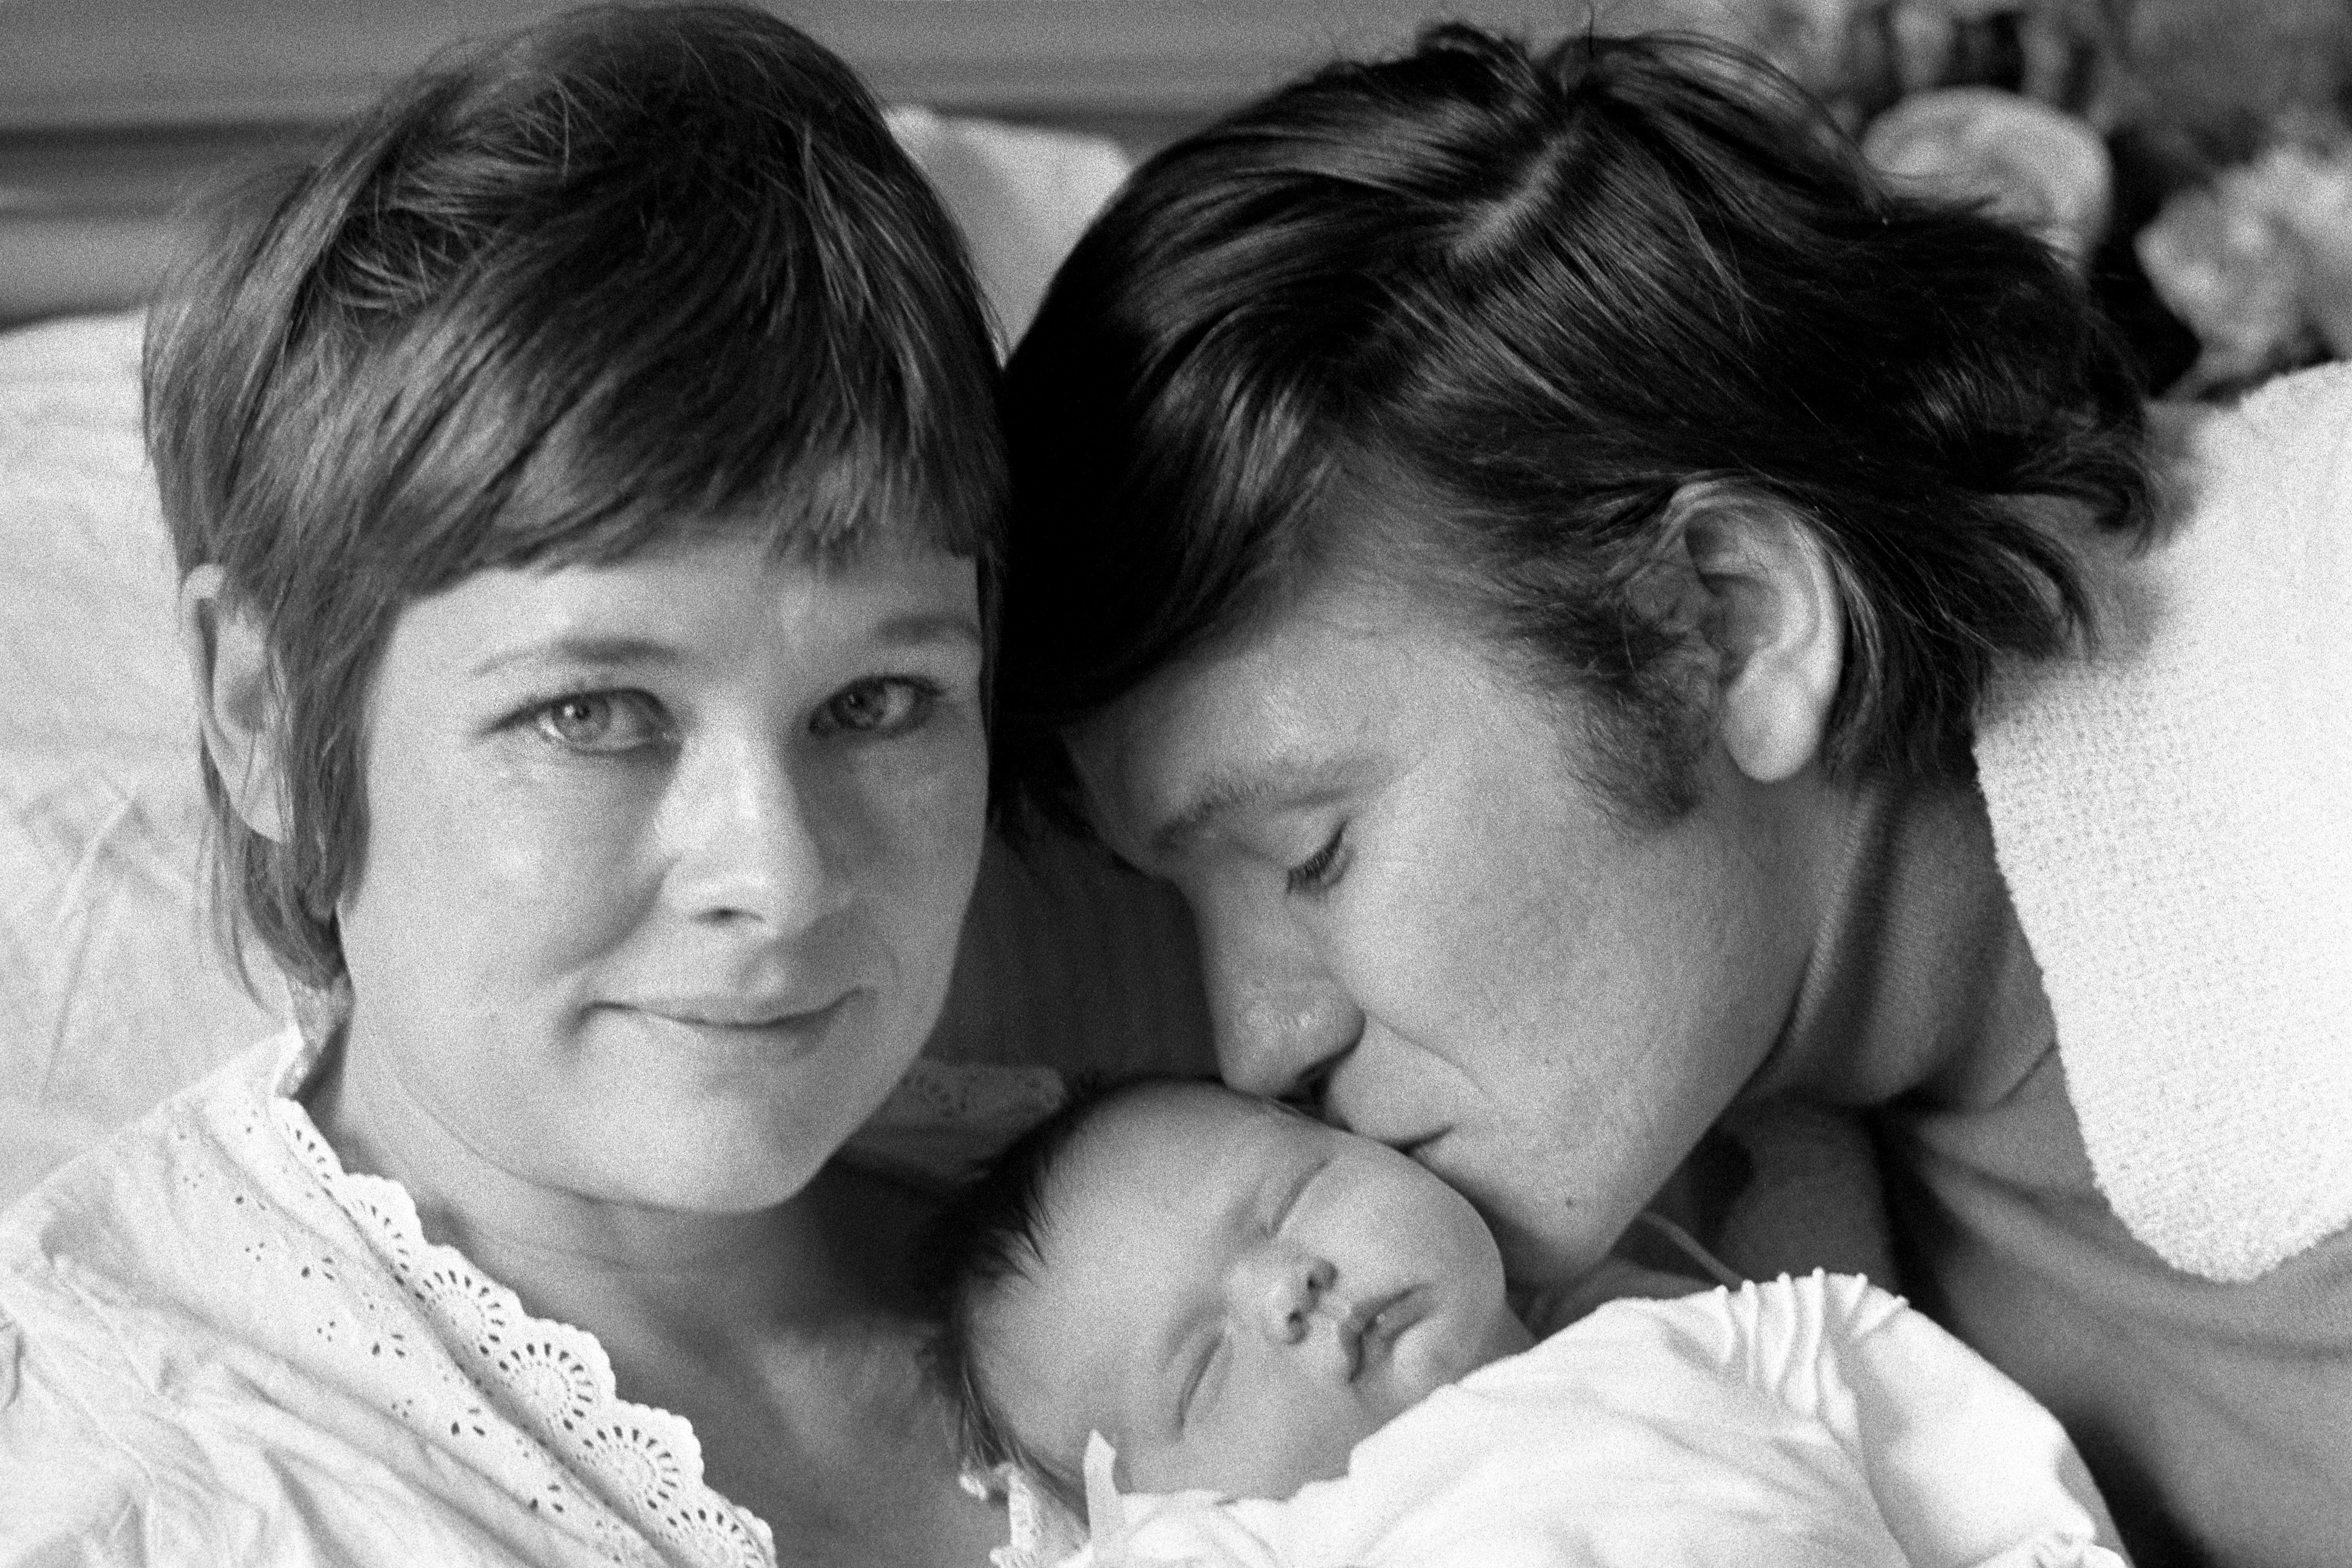 Judi Dench in the hospital with Michael Williams and their daughter Finty Williams | Source: Getty Images